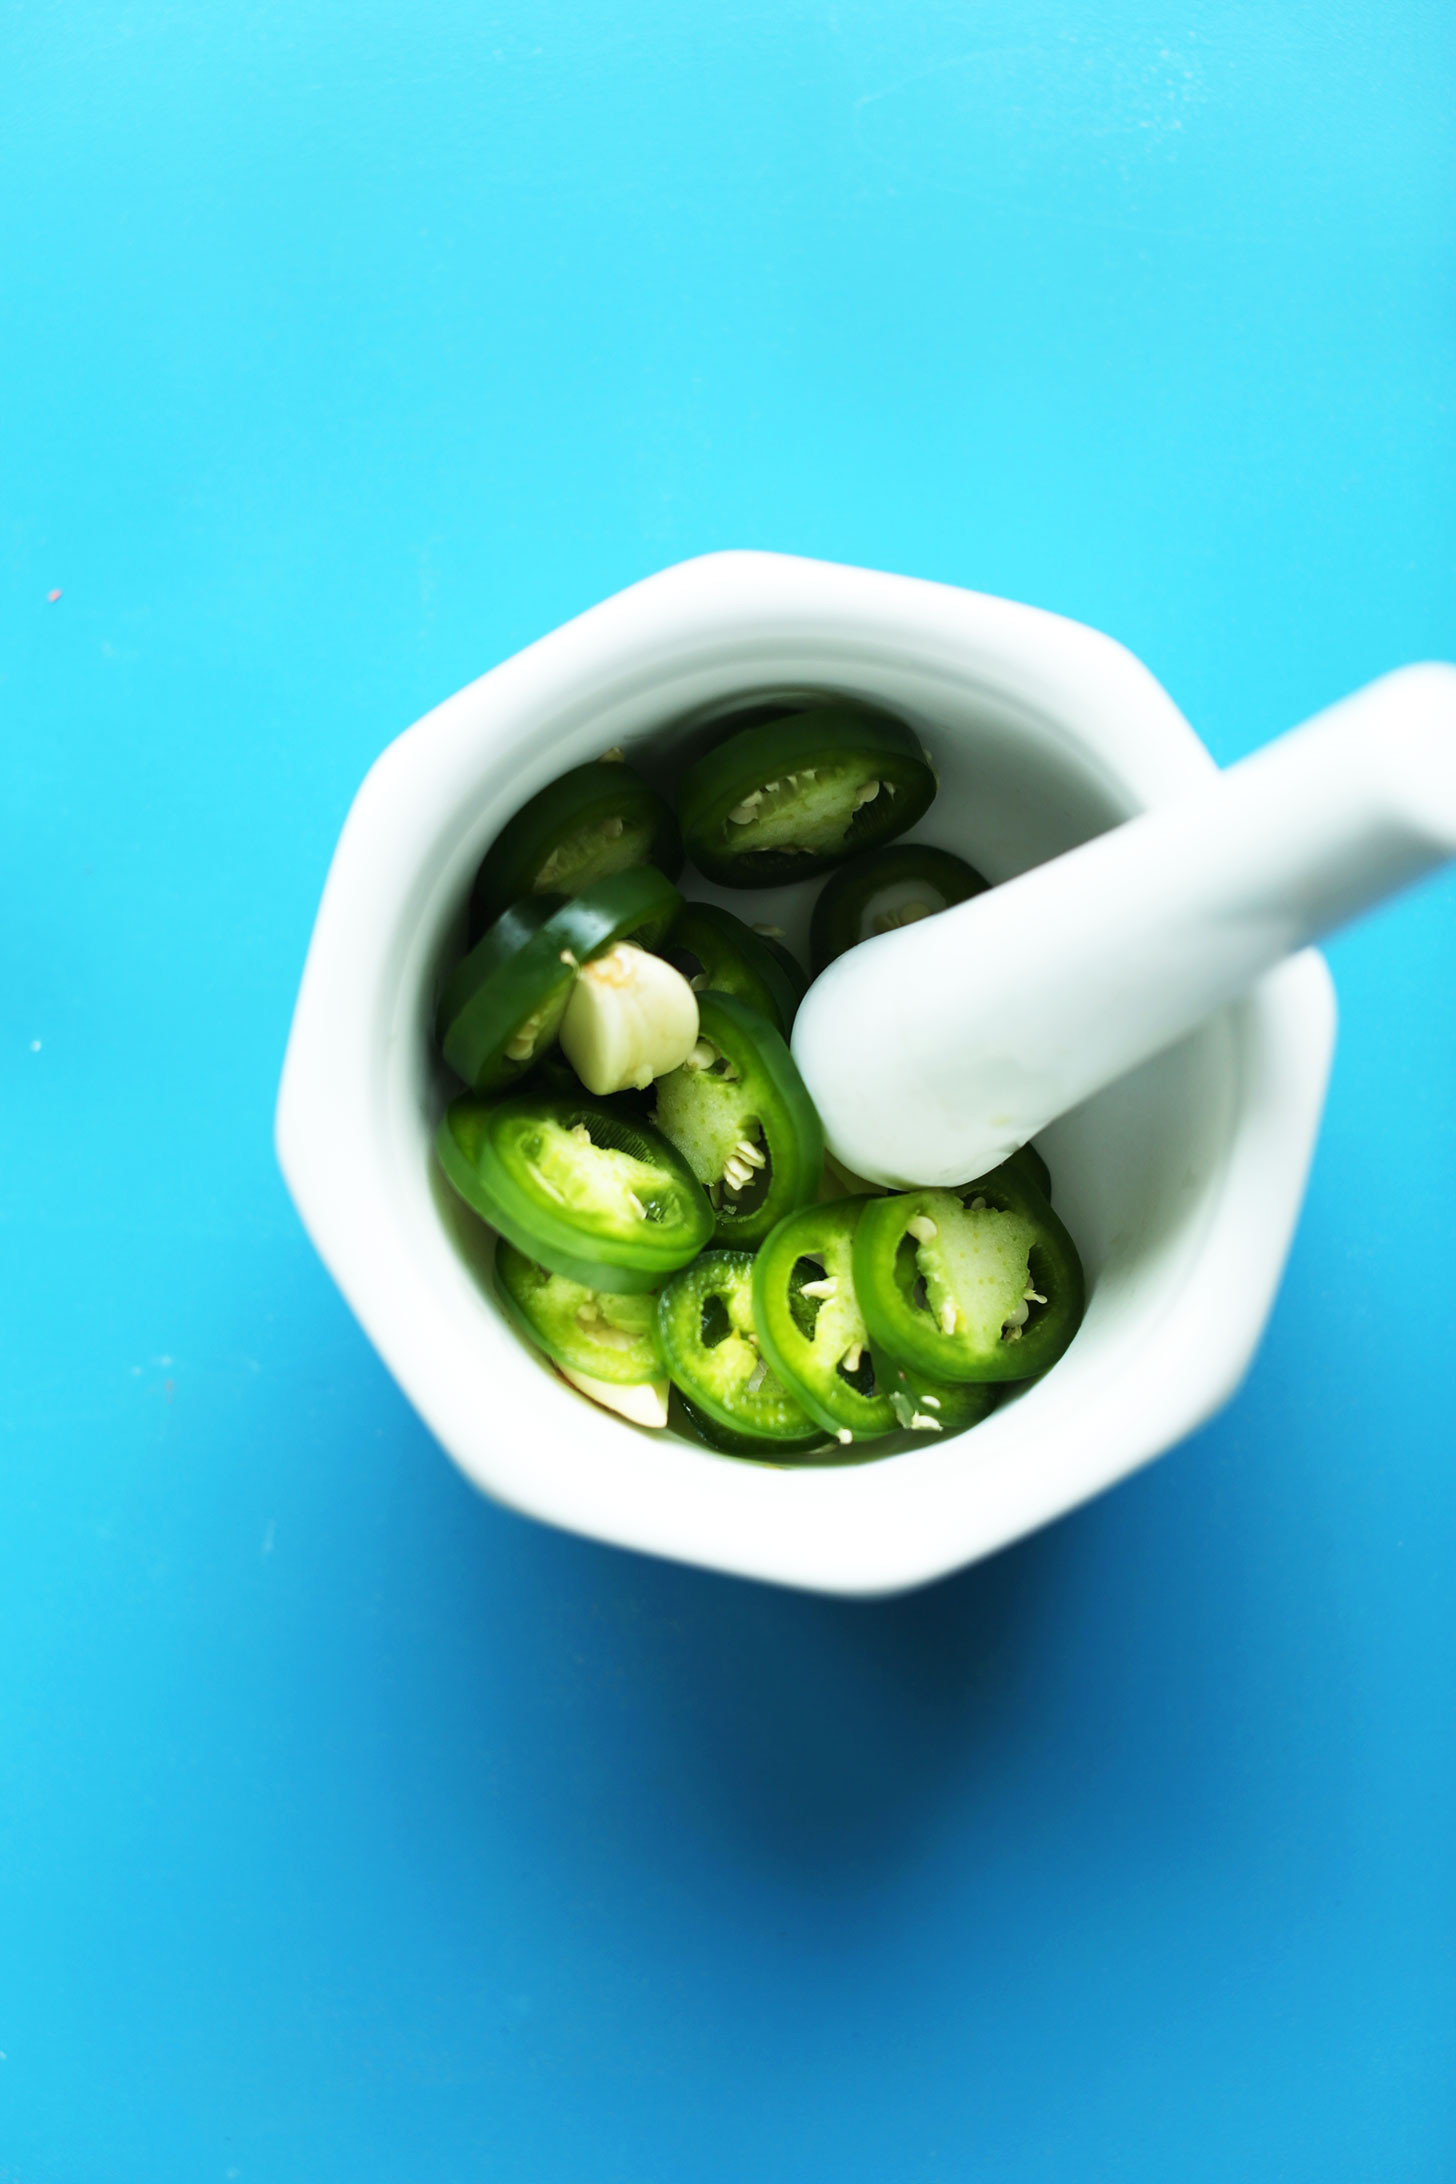 Mortar and pestle with sliced jalapenos for making our healthy chili recipe